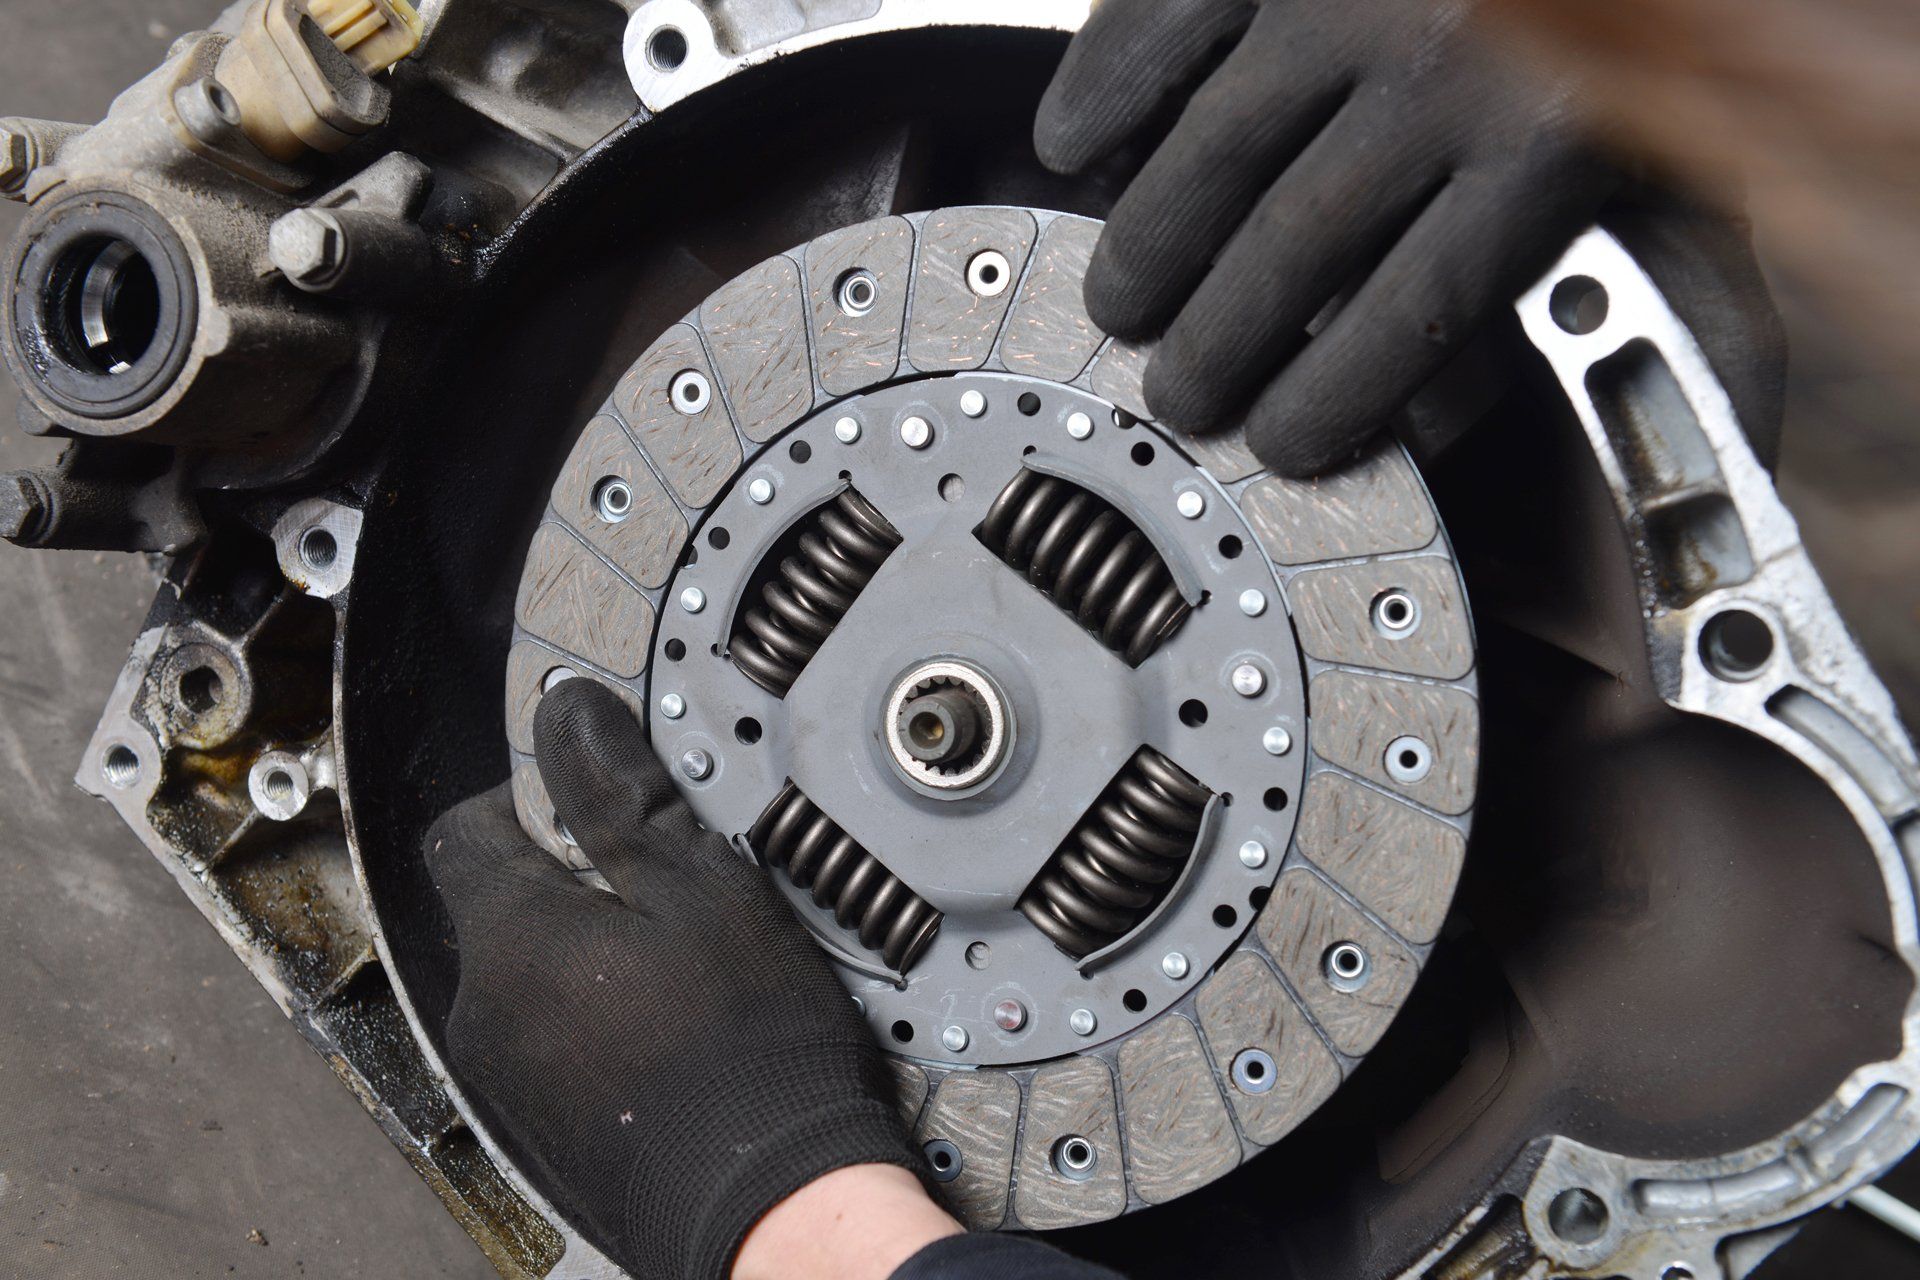 How to Test if Your Clutch and Brakes Are Working